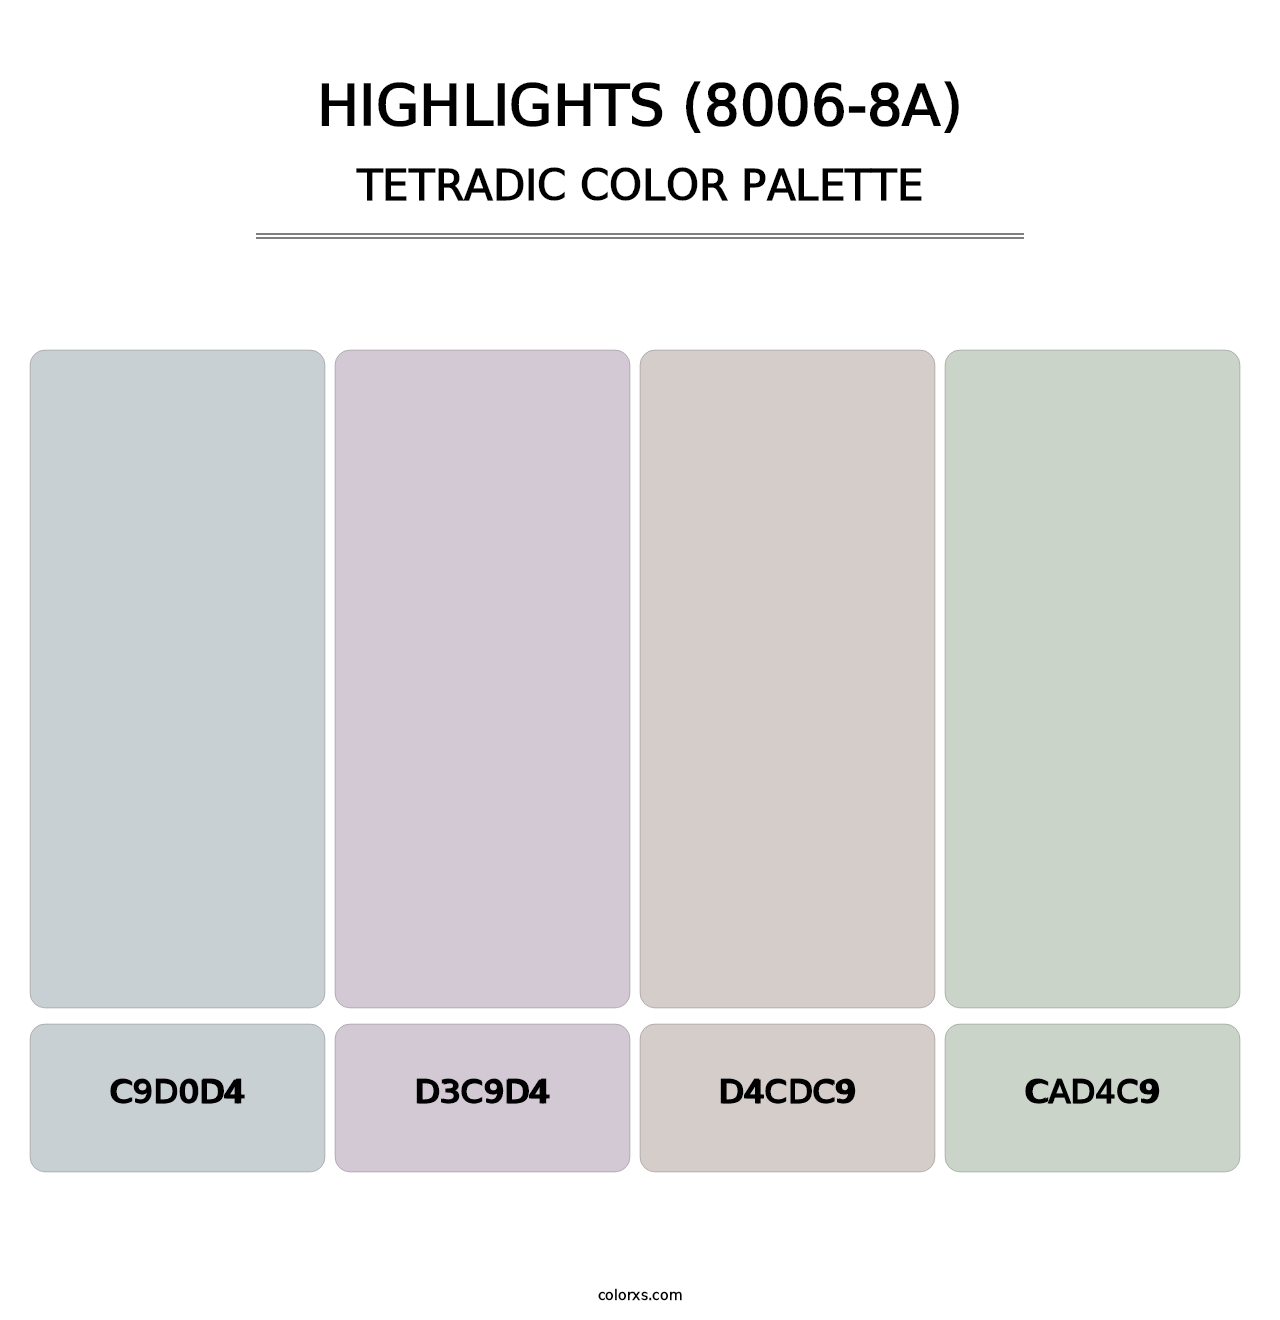 Highlights (8006-8A) - Tetradic Color Palette